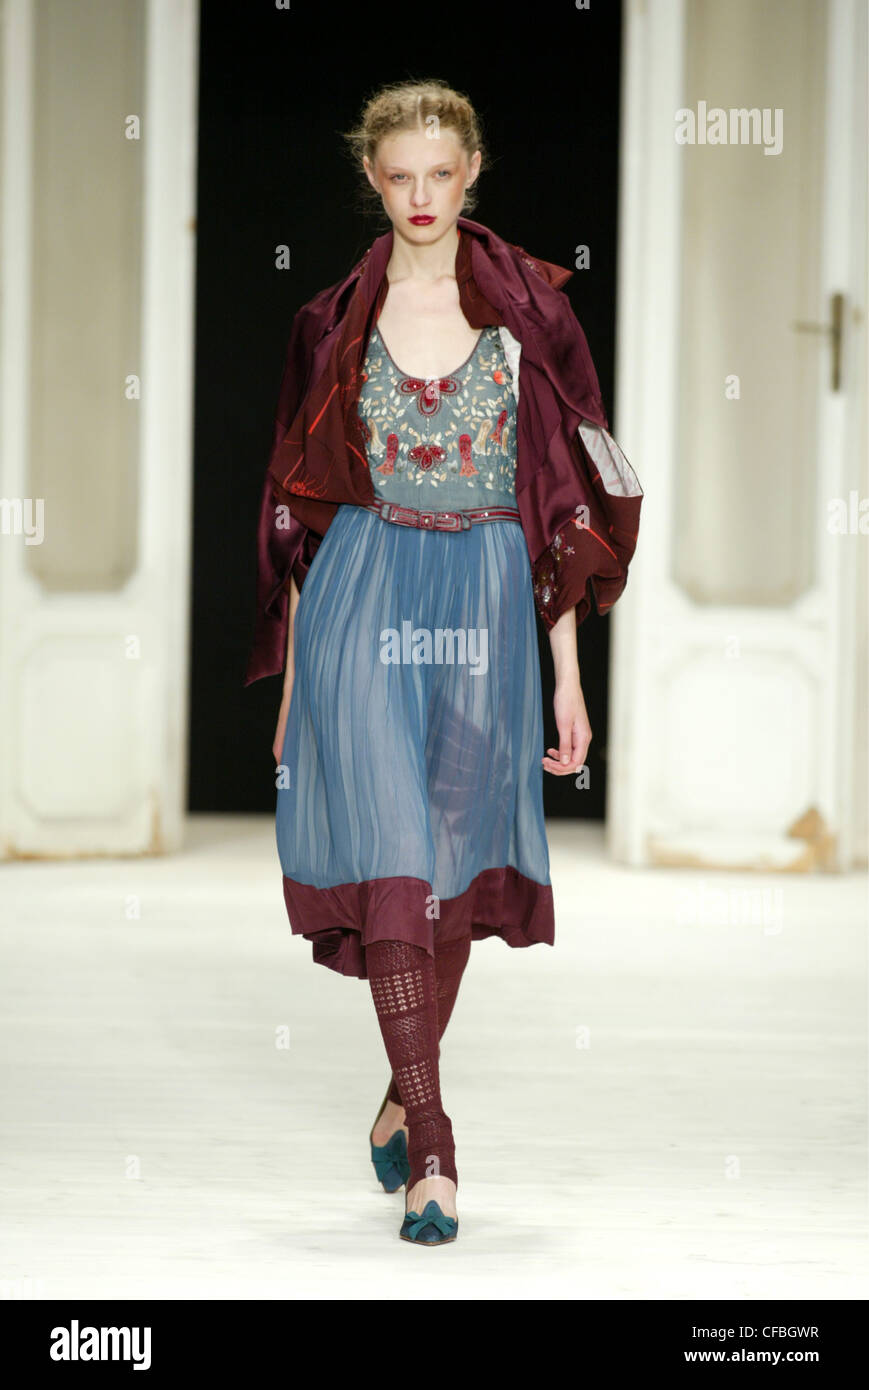 Antonio marras model hi-res stock photography and images - Alamy